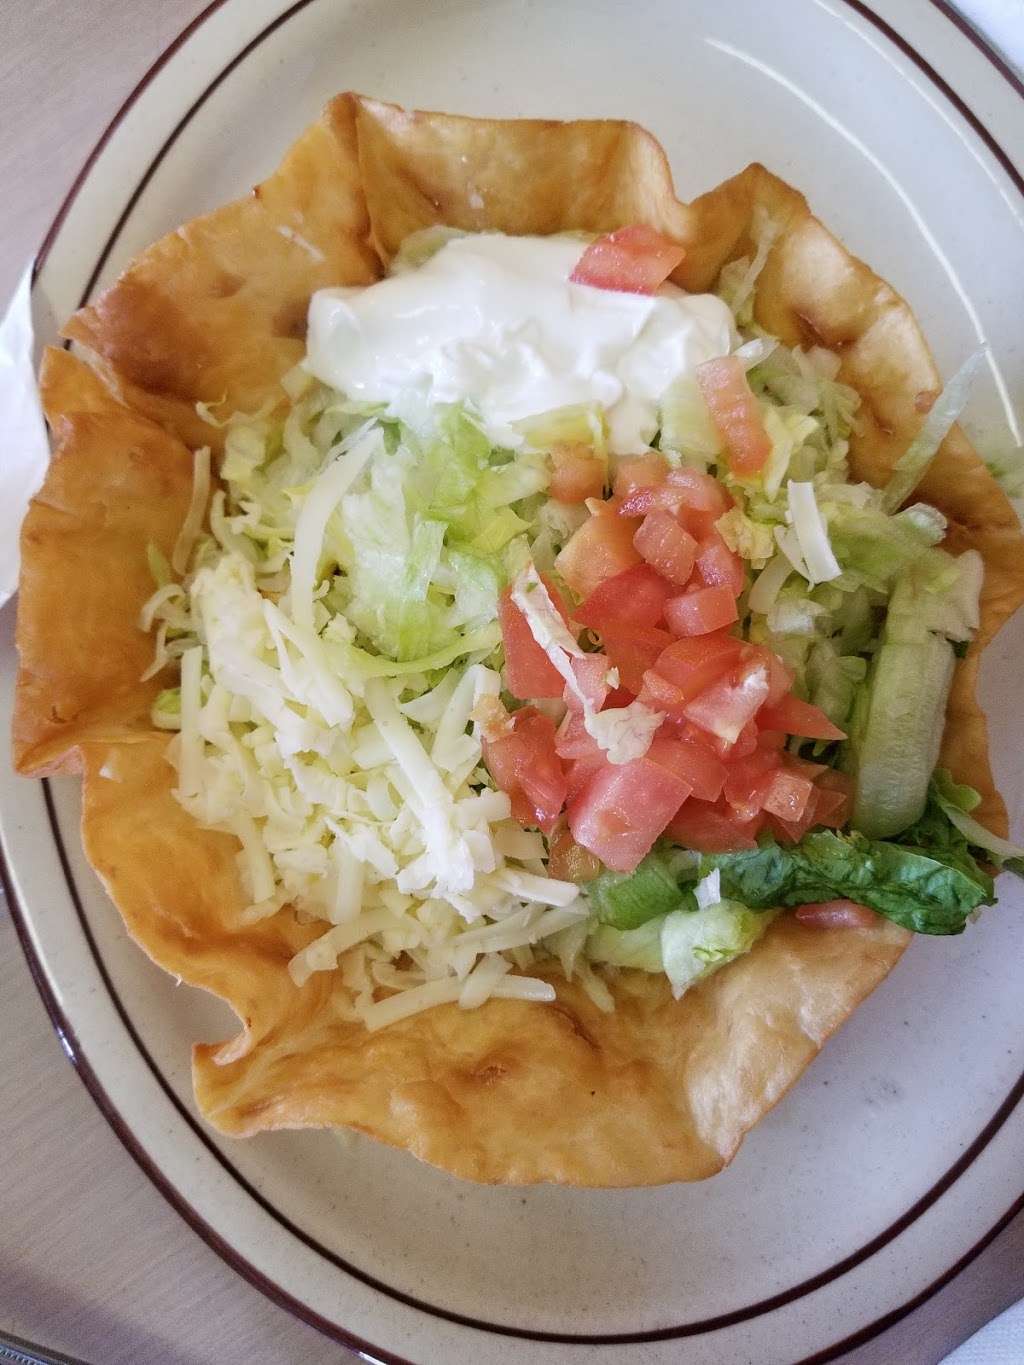 Sabor A Mexico | 201 Mineral Ave, Mineral, VA 23117 | Phone: (540) 894-5500